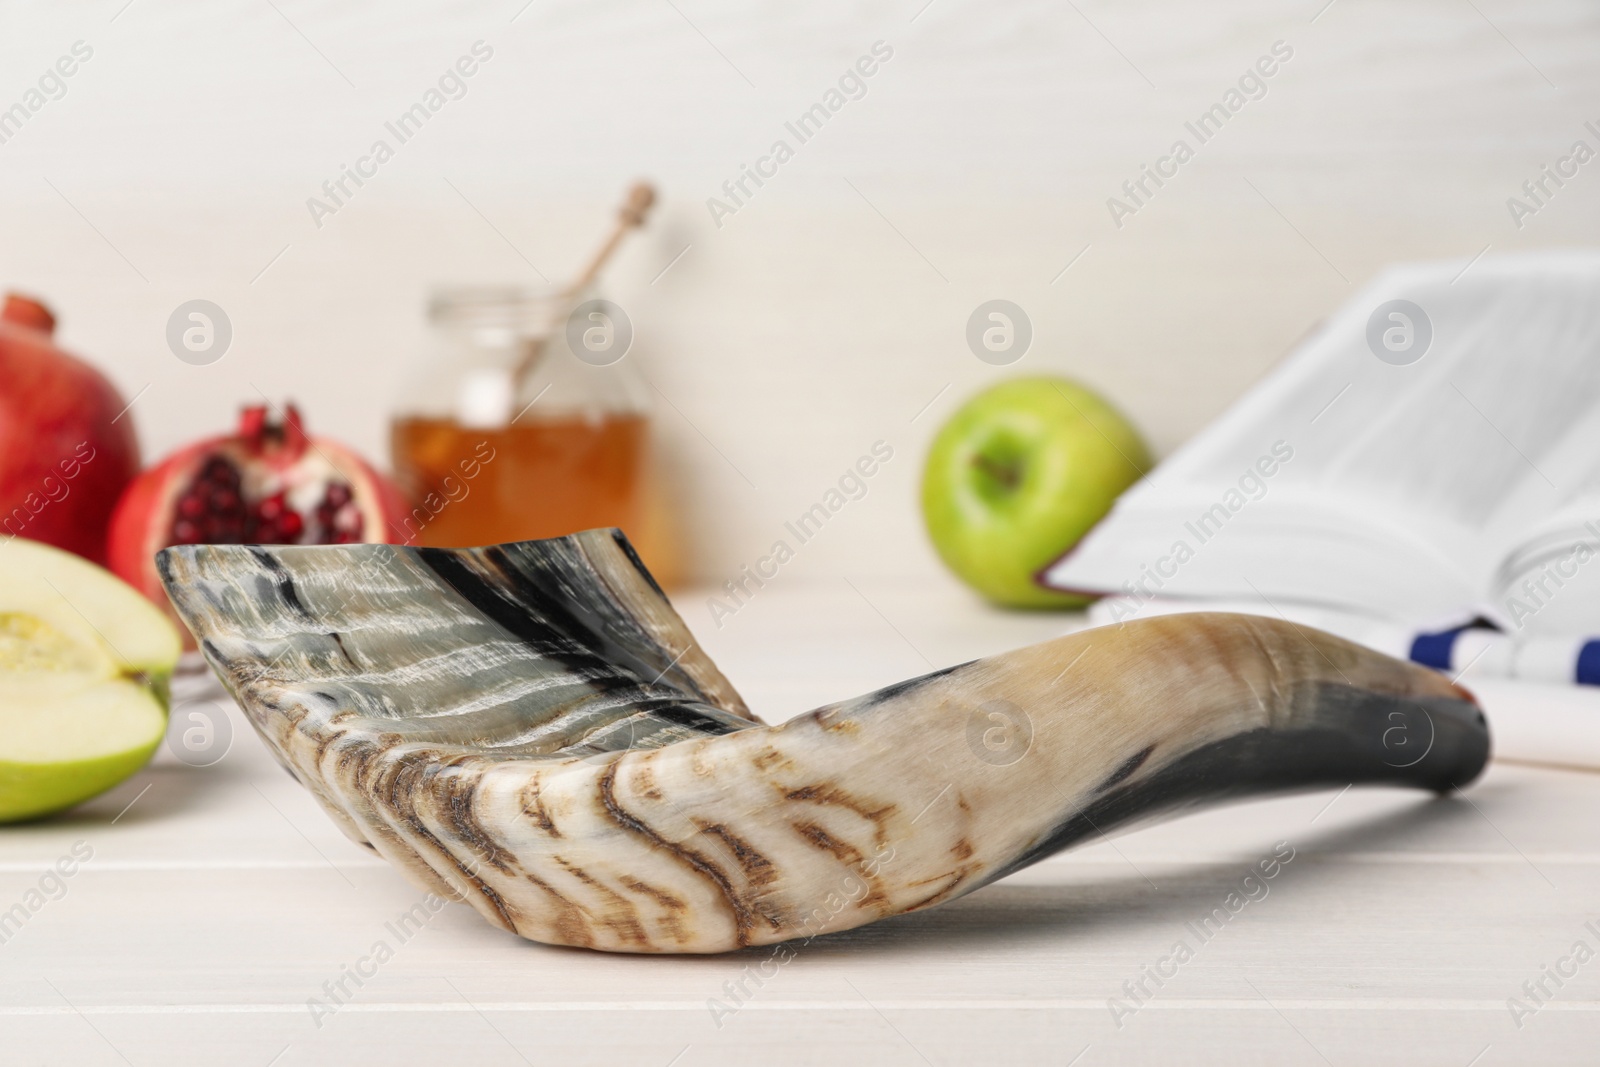 Photo of Shofar and other Rosh Hashanah holiday attributes on white wooden table